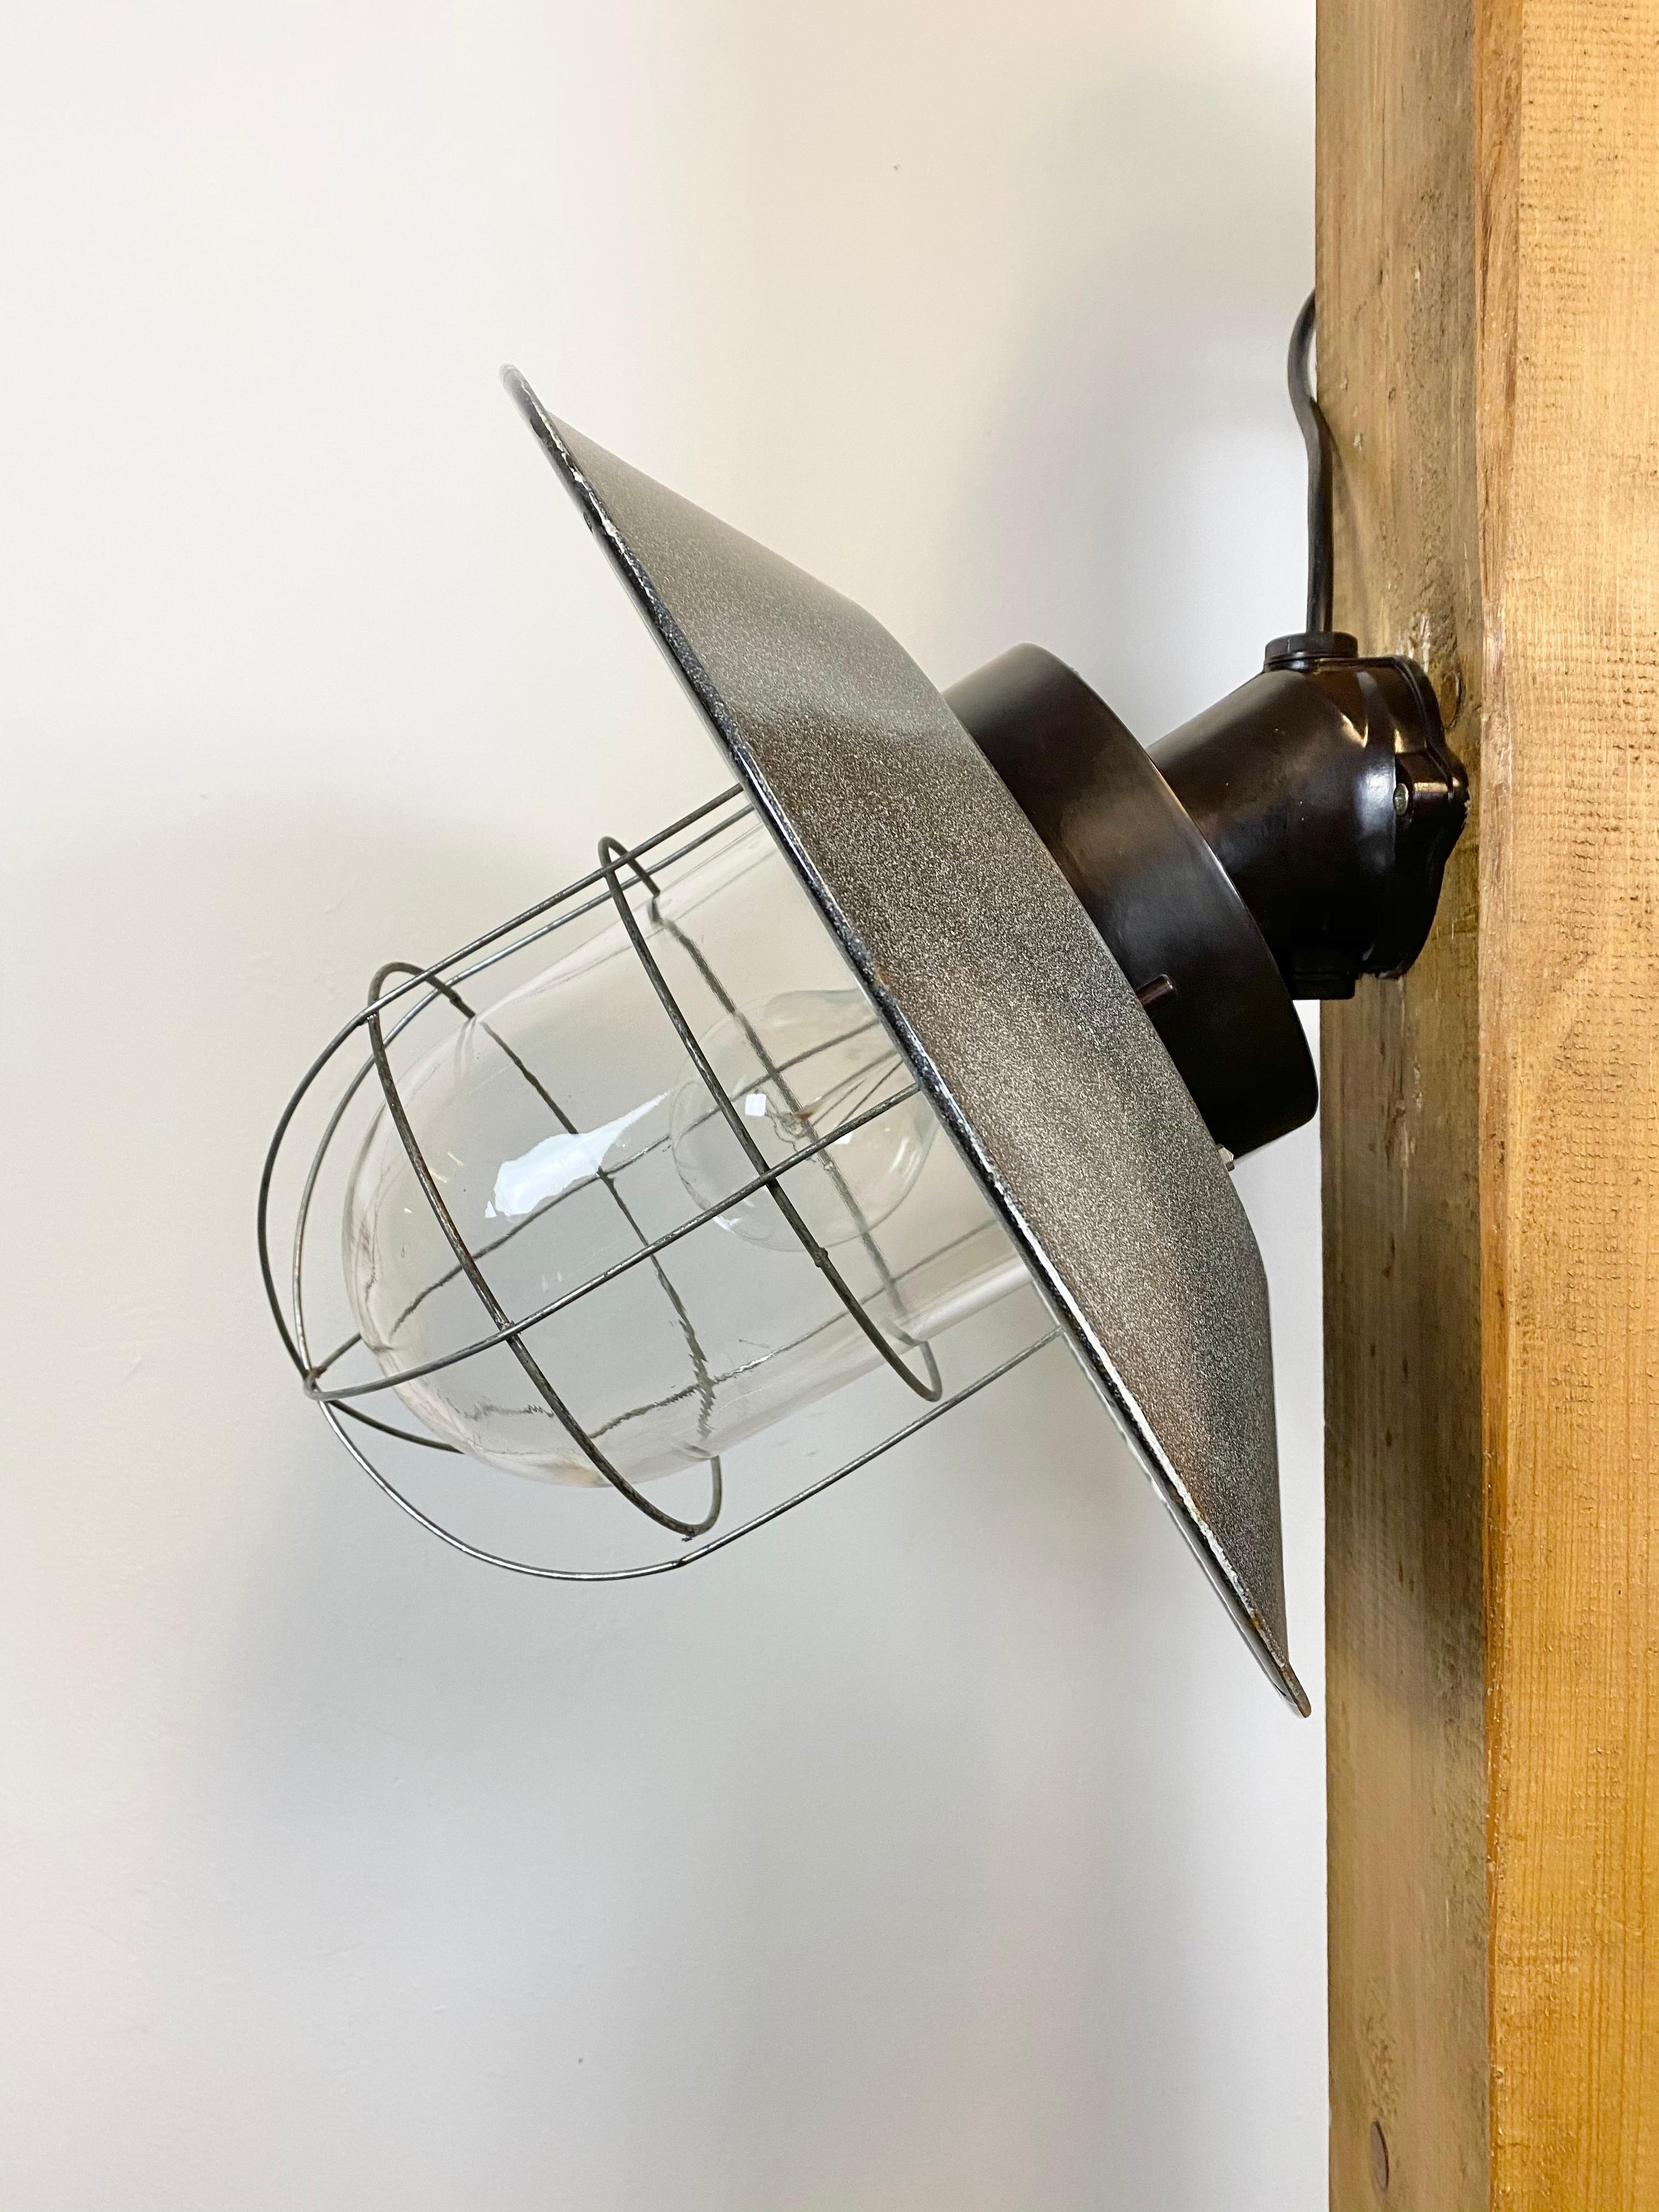 - Industrial wall lamp with bakelite wall mounting from former Czechoslovakia
- Made during the 1960s
- Grey enamel shade with white interior
- Clear glass, iron grid
- Porcelain socket for E 27 lightbulbs and new wire
- Weight: 3.5 kg.